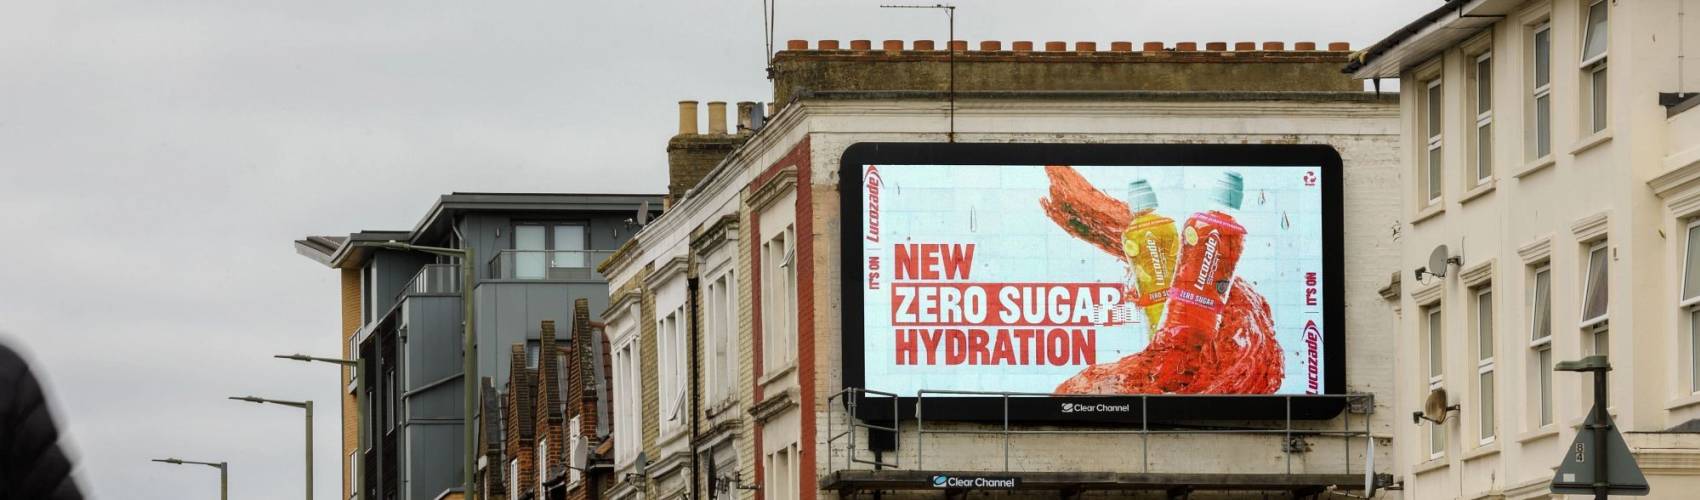 Large billboard showing ad for Lucozade